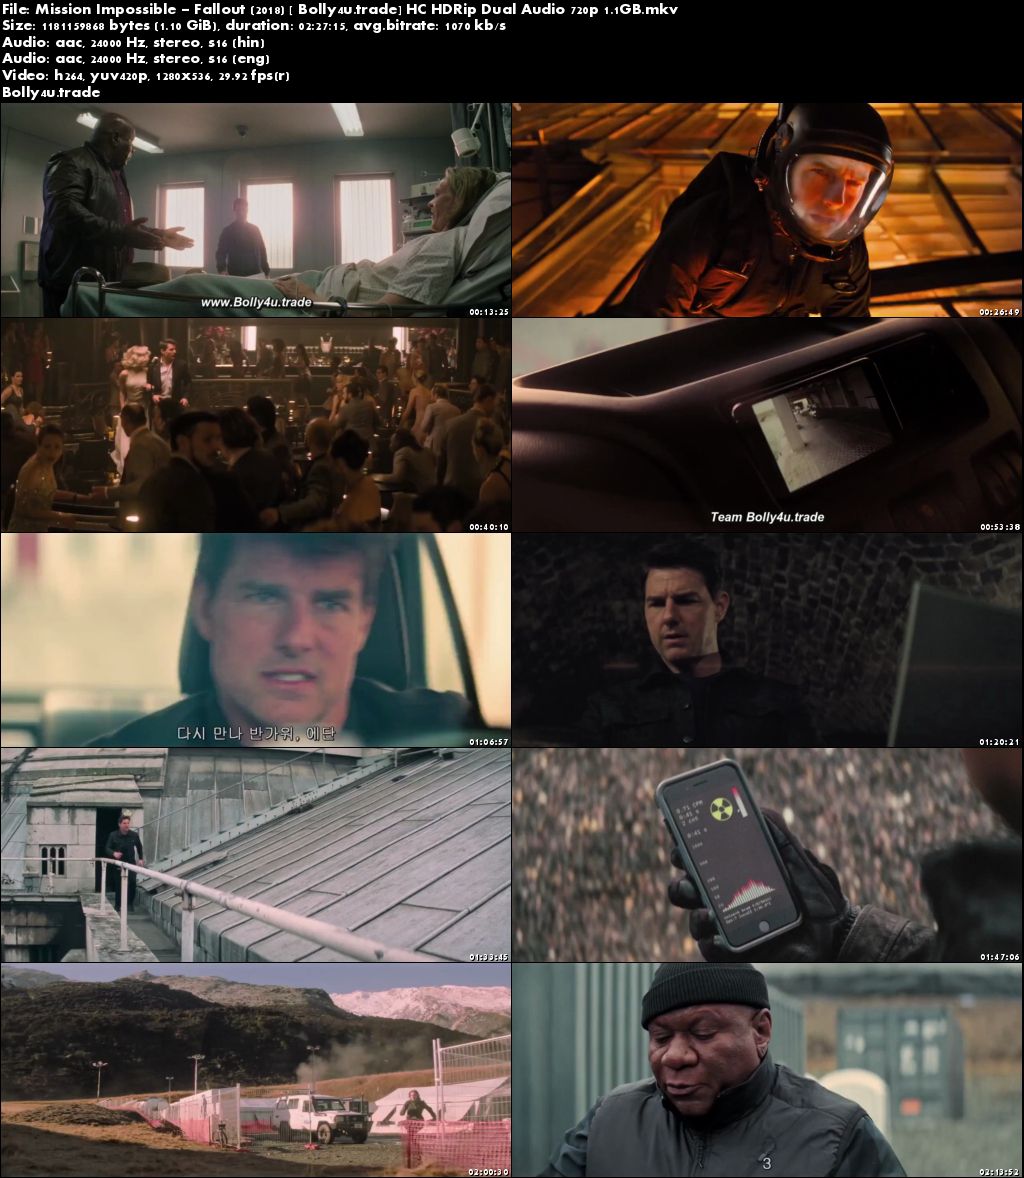 Mission Impossible Fallout 2018 HC HDRip 450MB Hindi Dual Audio 480p Download